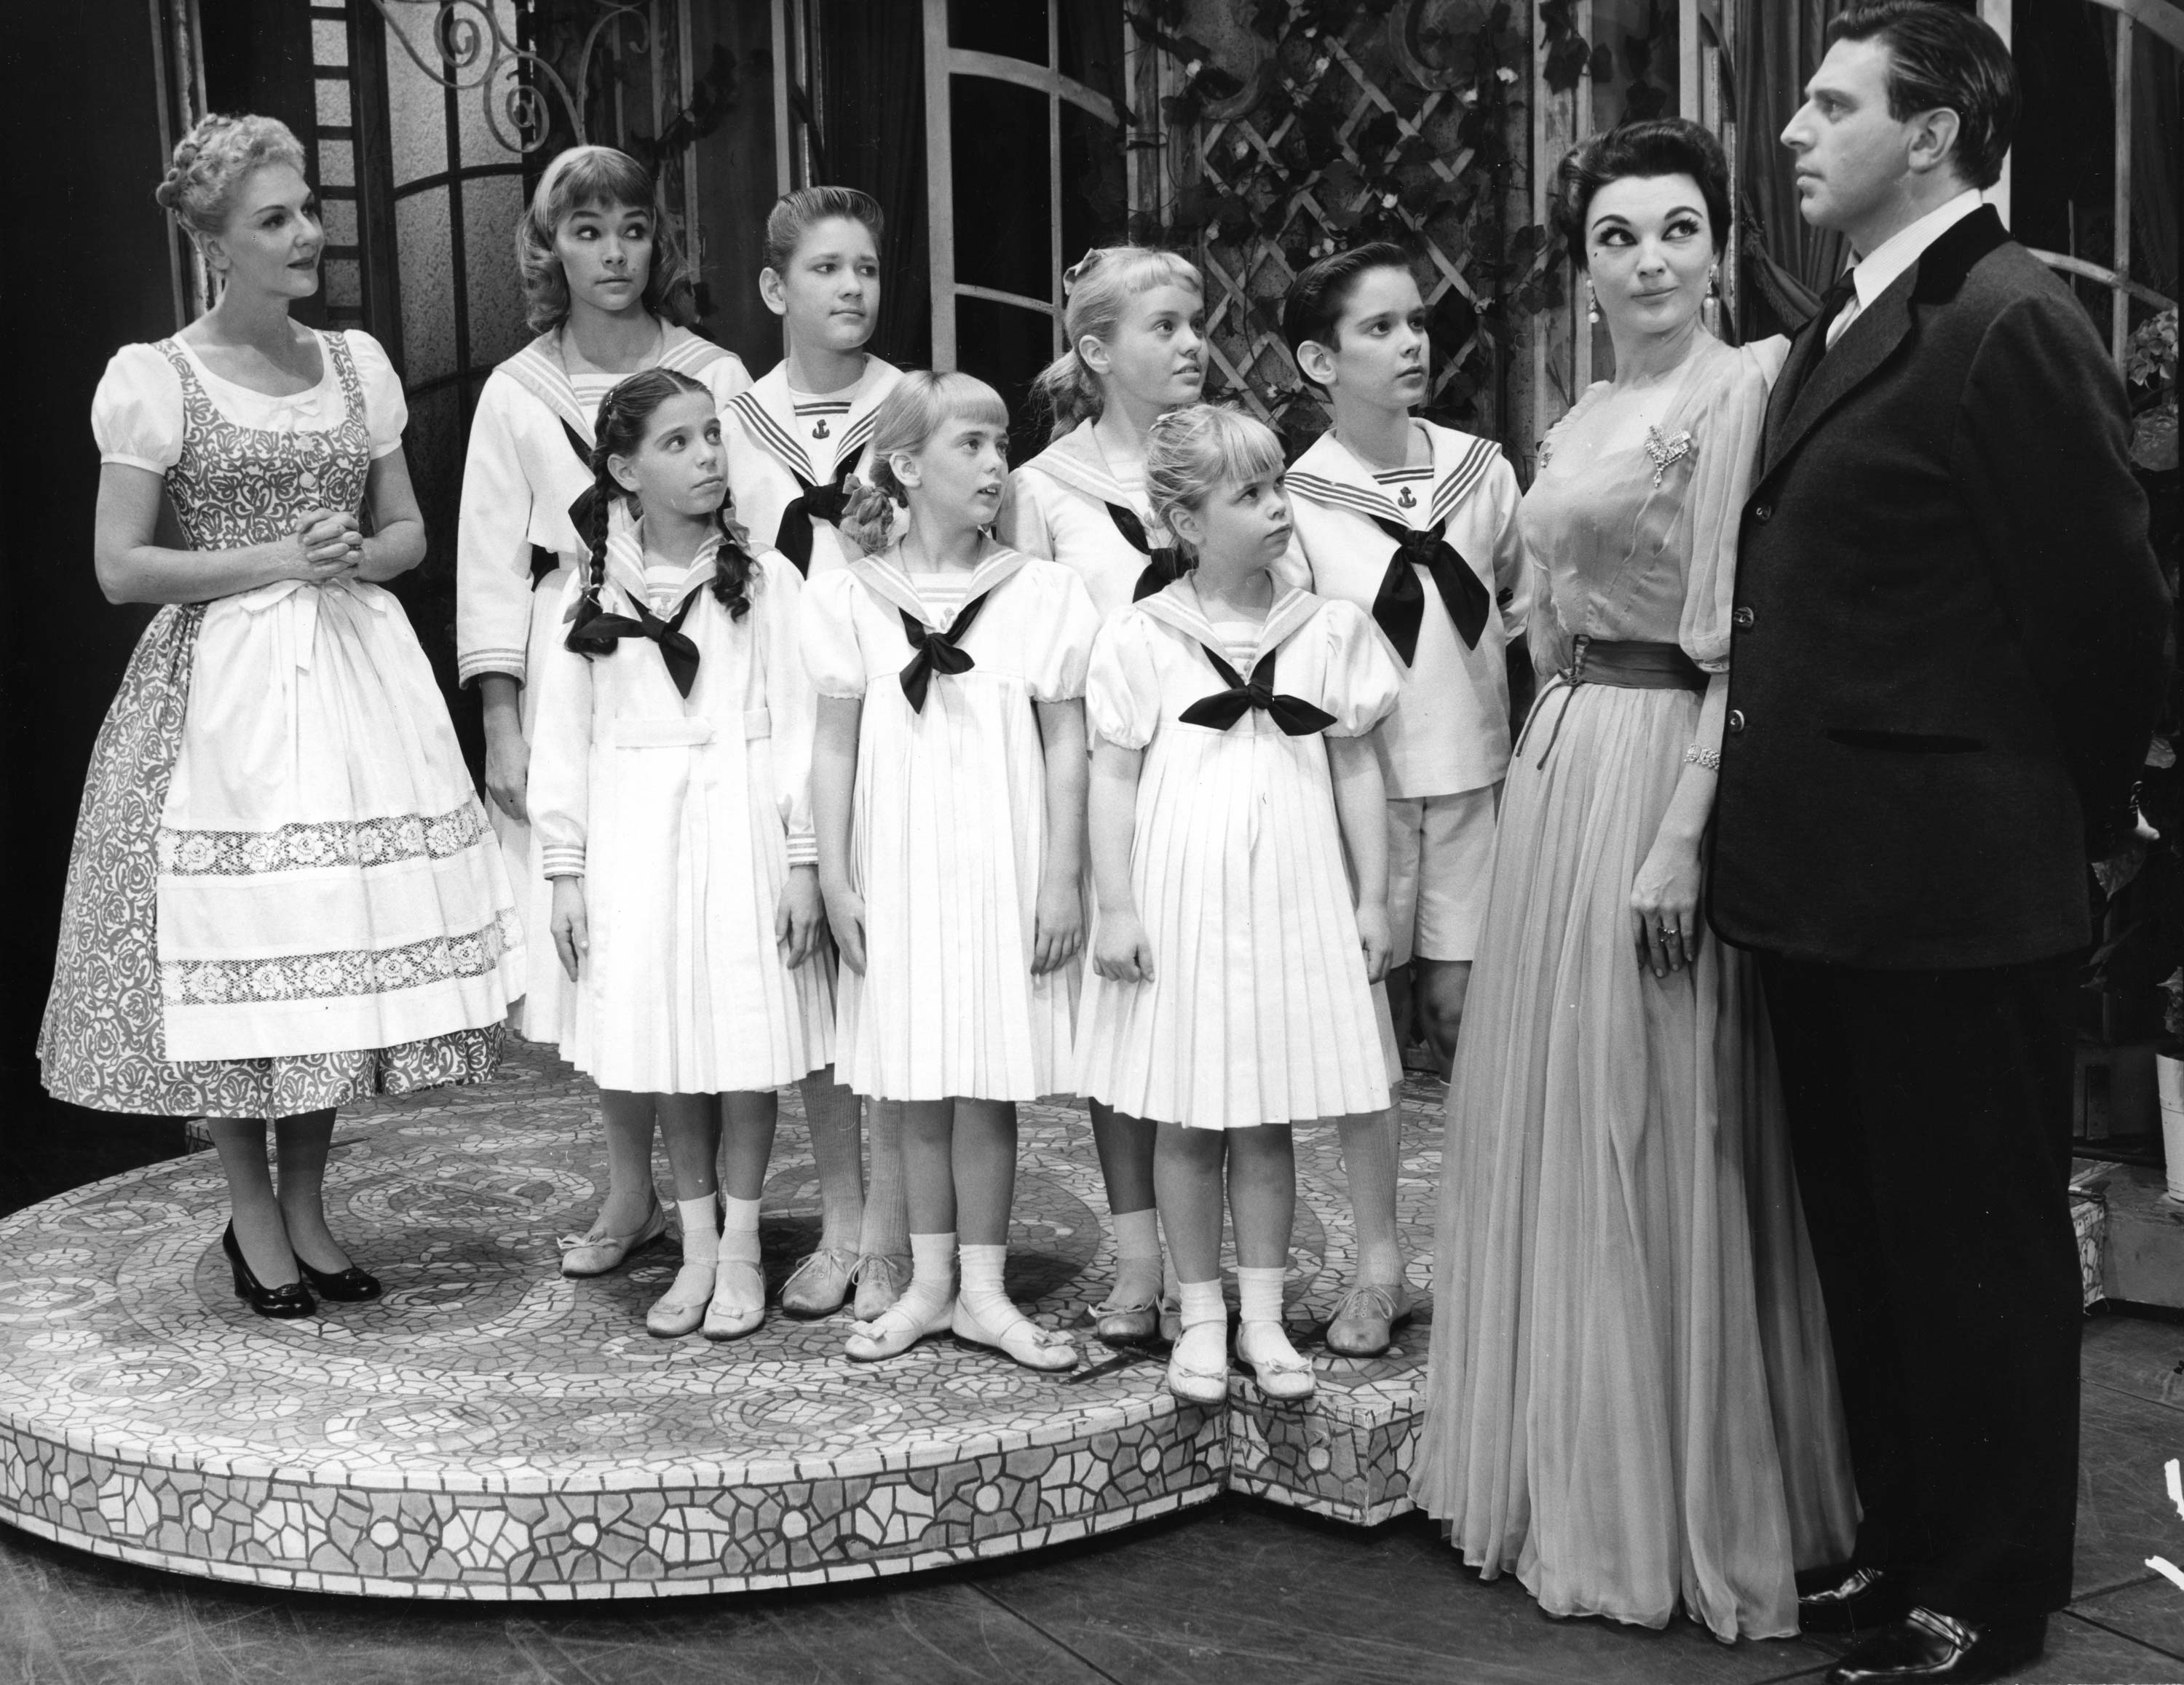 A photo from the 1959 Broadway production of The Sound of Music.